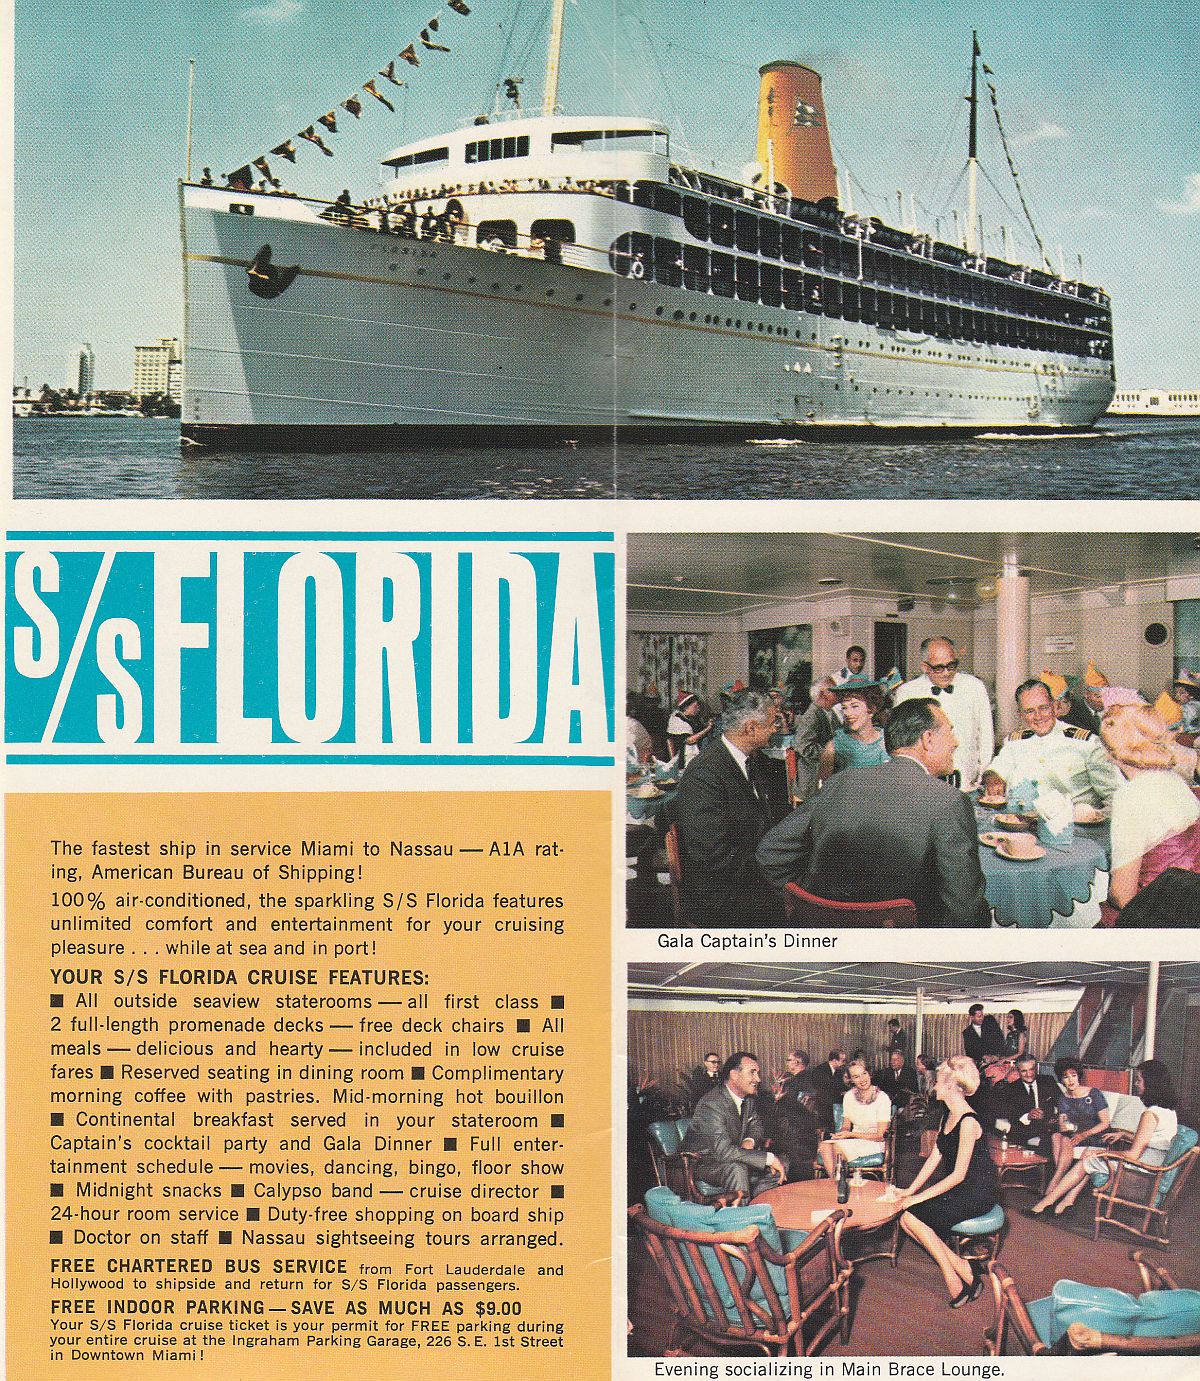 ss Florida About ss Florida: Your cruise features